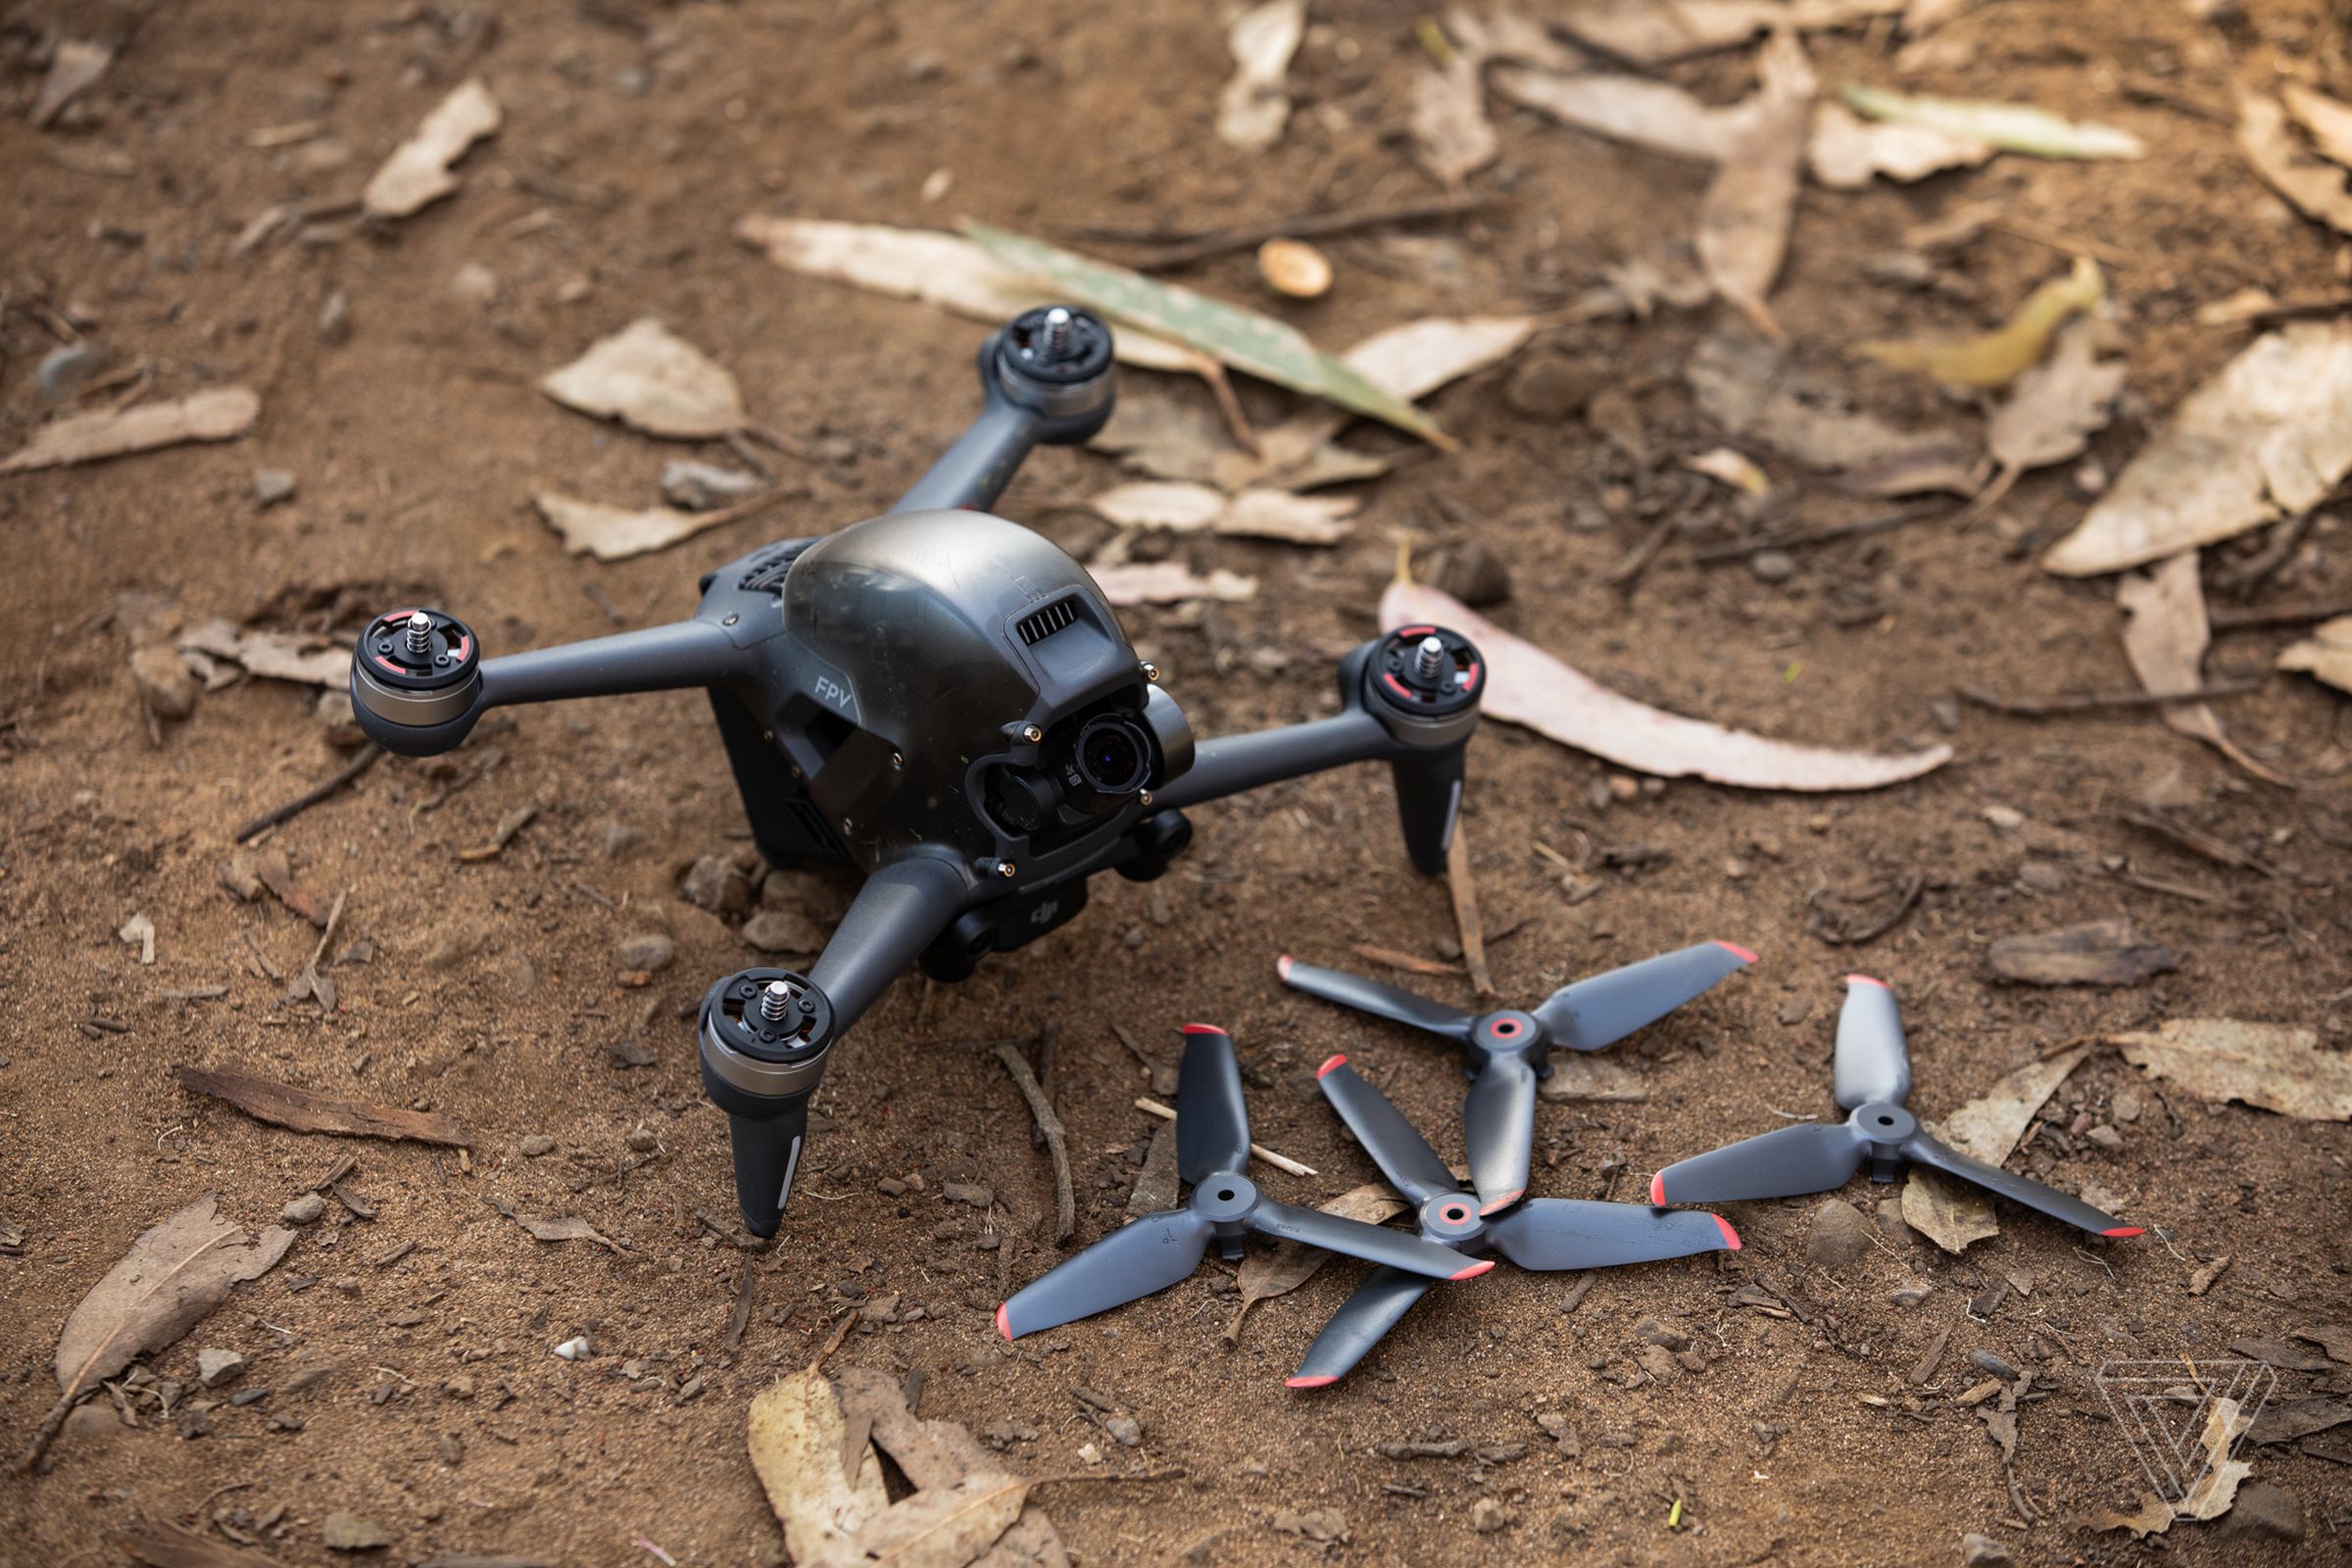 DJI’s FPV drone isn’t exactly portable, but taking the propellers off might help.